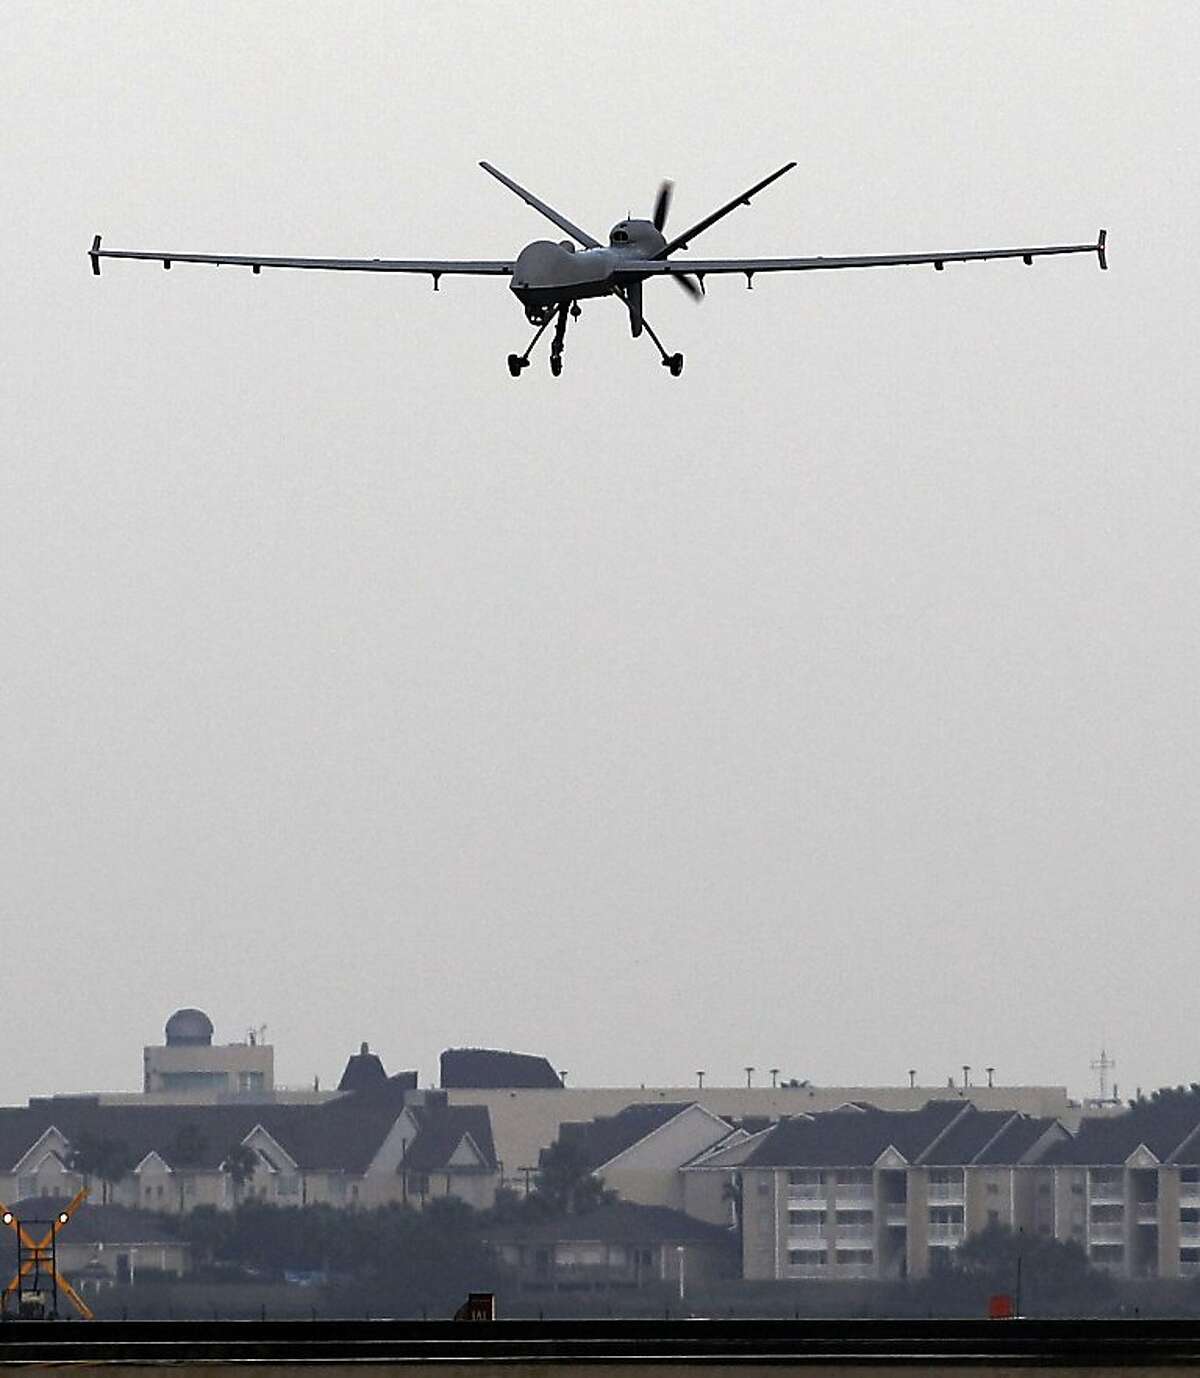 A Predator B unmanned aircraft lands after a mission at the Naval Air Station, Tuesday, Nov. 8, 2011, in Corpus Christi.